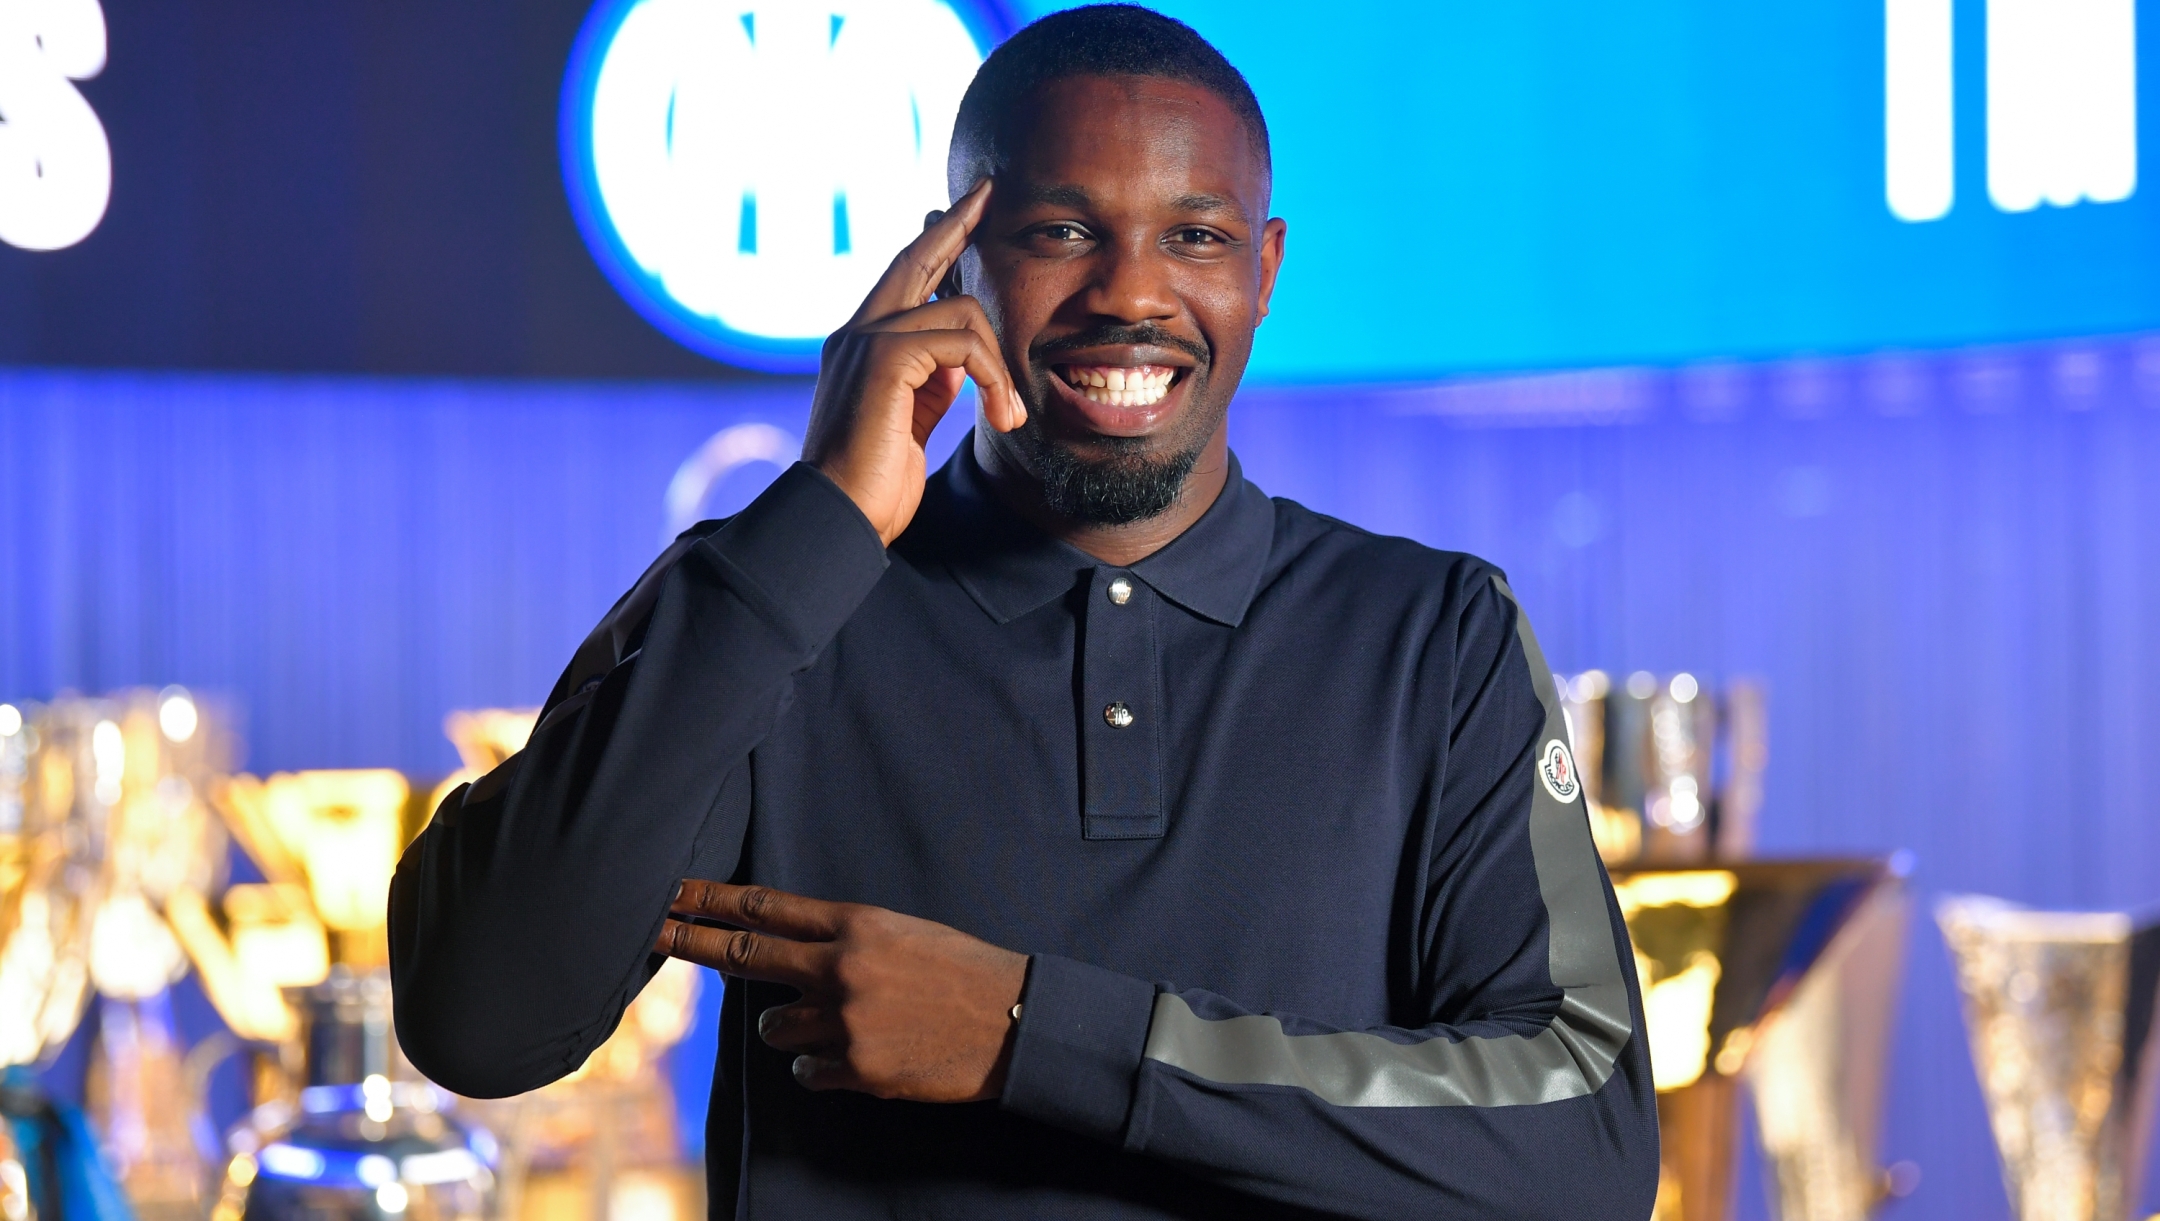 MILAN, ITALY - JUNE 27: New FC Internazionale signing Marcus Thuram poses for a picture at FC Internazionale Headquarters on June 27, 2023 in Milan, Italy. (Photo by Mattia Pistoia - Inter/Inter via Getty Images)